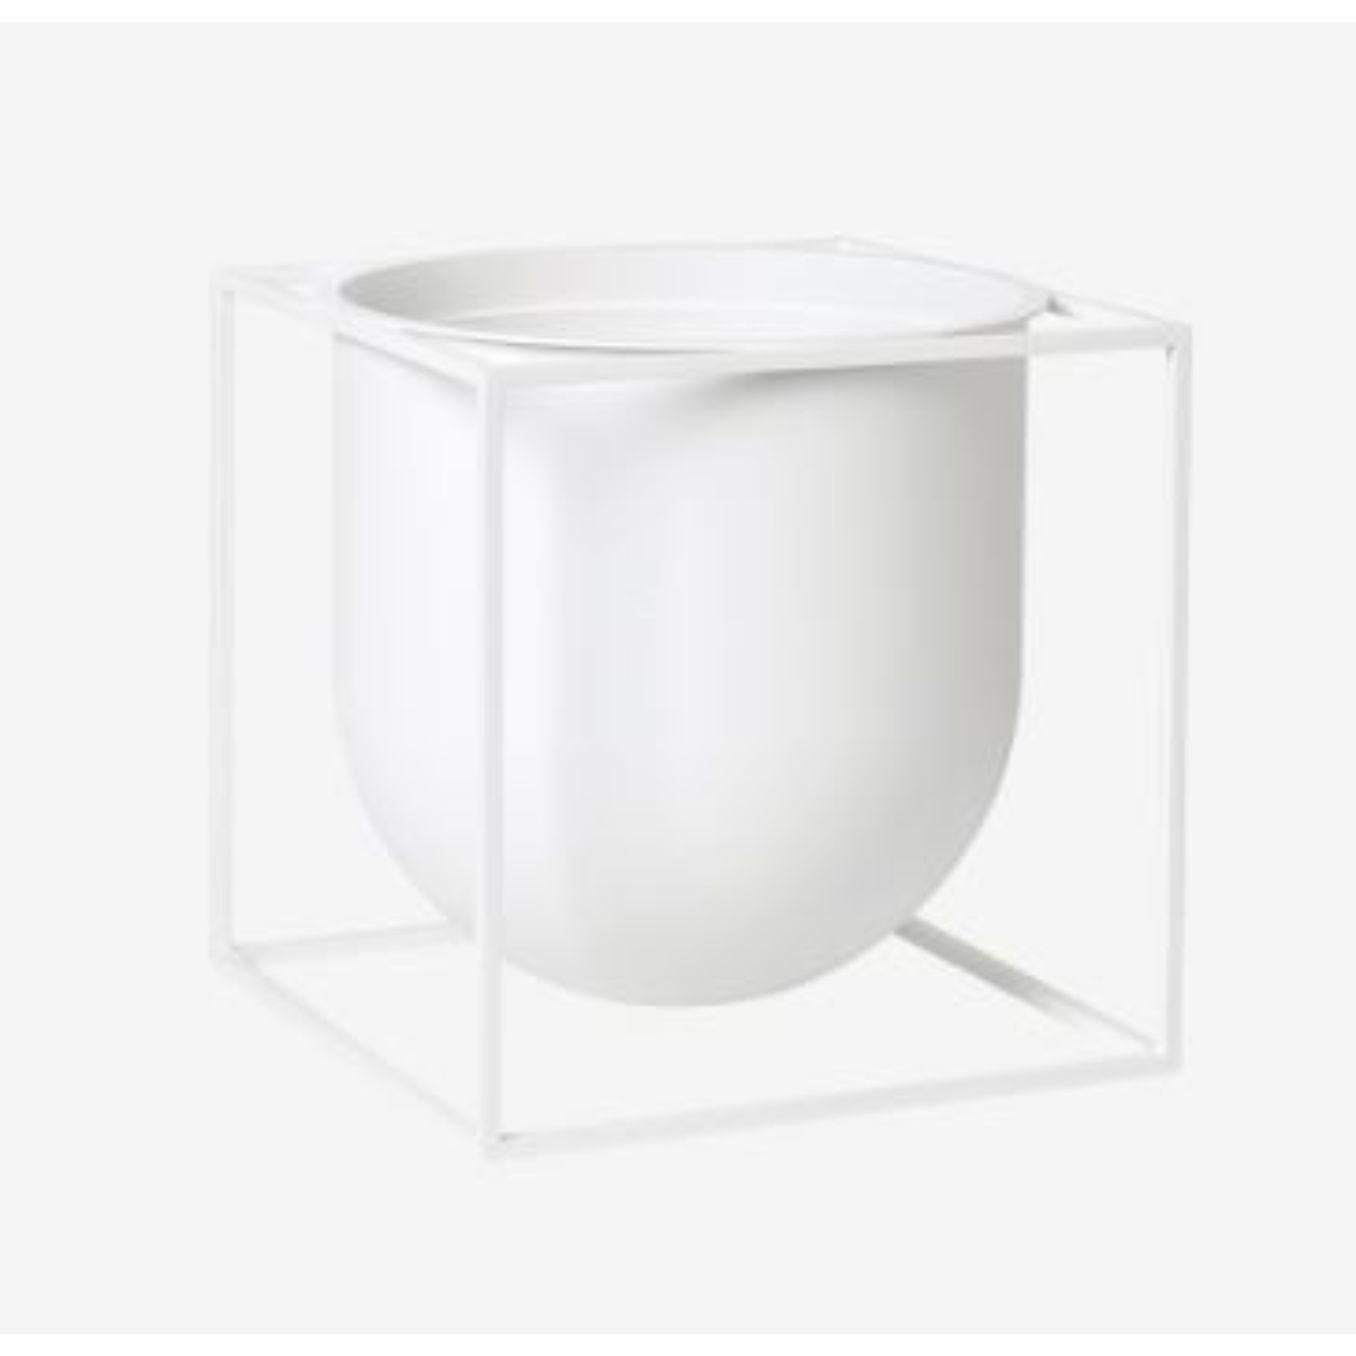 White flowerpot 23 Kubus vase by Lassen
Dimensions: D 23 x W 23 x H 23 cm 
Materials: Metal 
Also available in different colours and dimensions. 
Weight: 3.30 kg

Herb pot, vase or a simple container. The possibilities are endless. Another